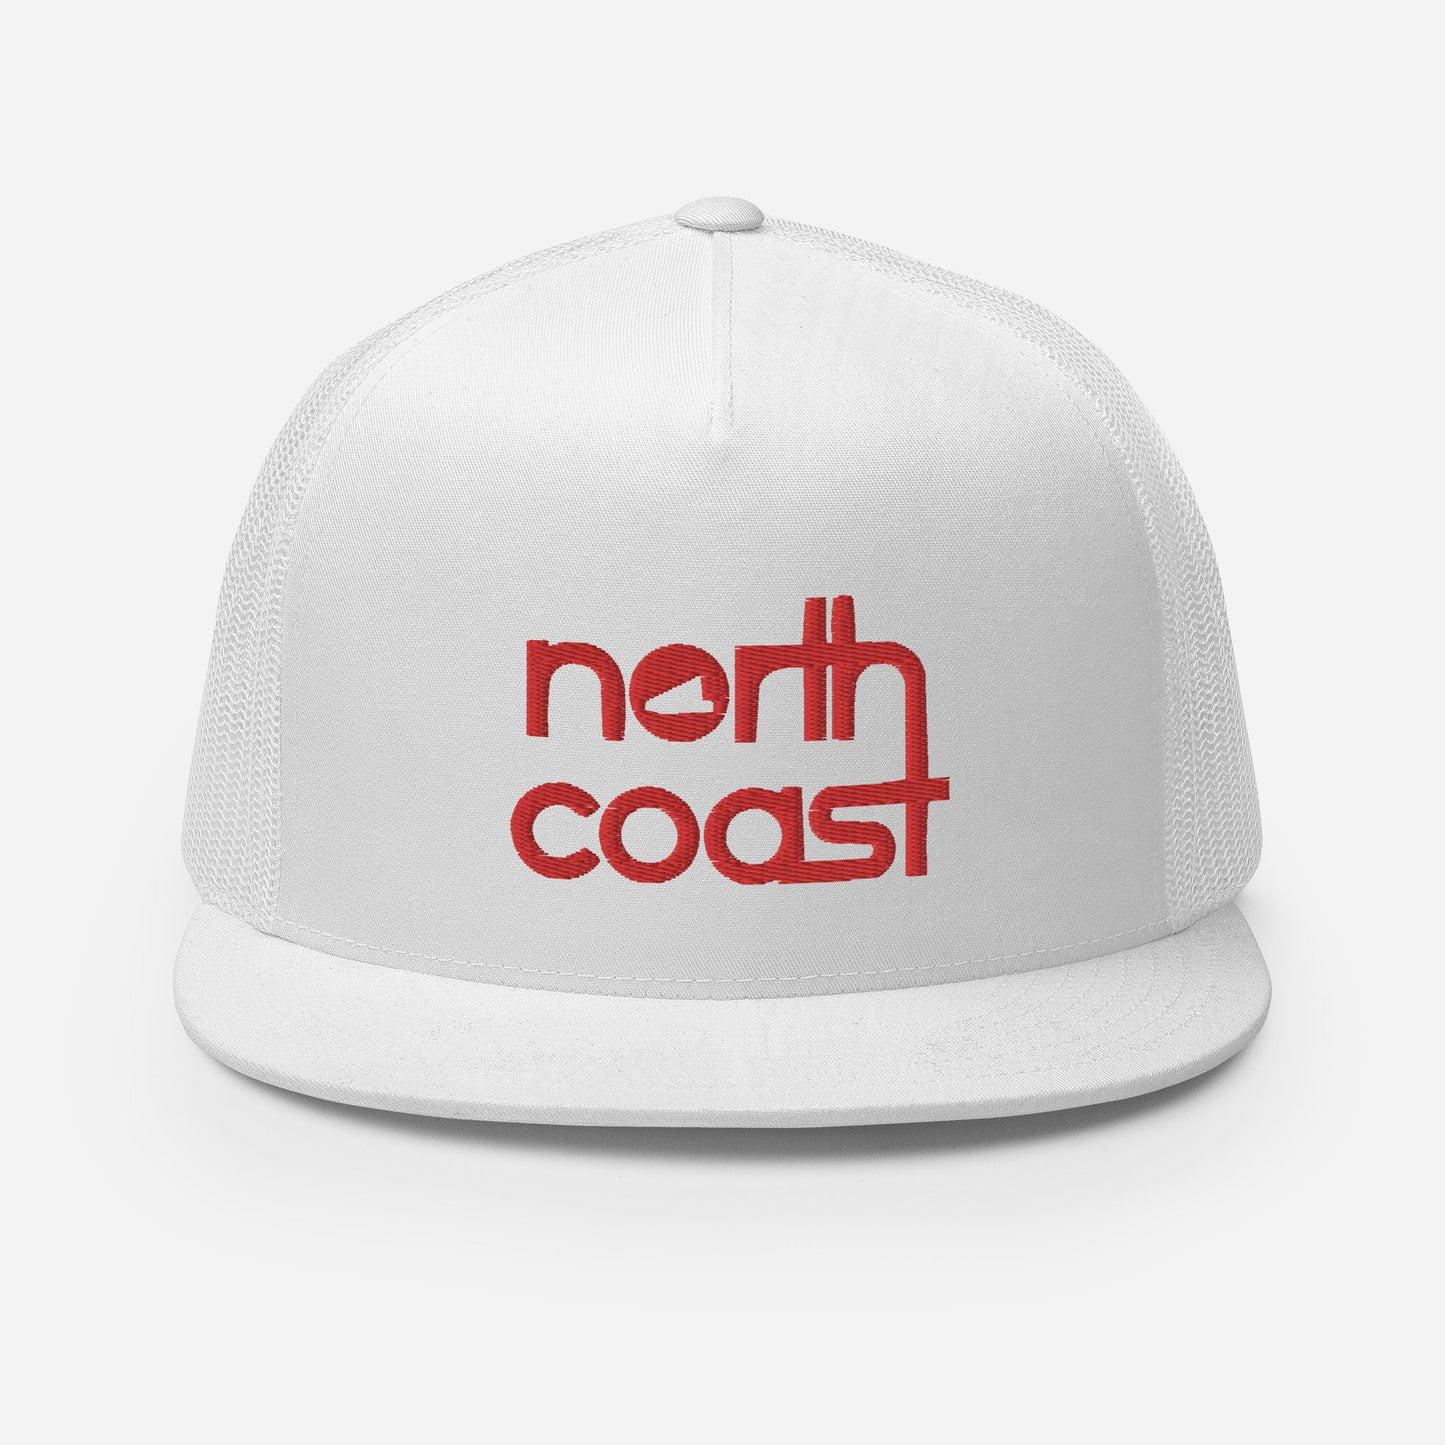 North Coast Trucker Cap (Red Embroidery)